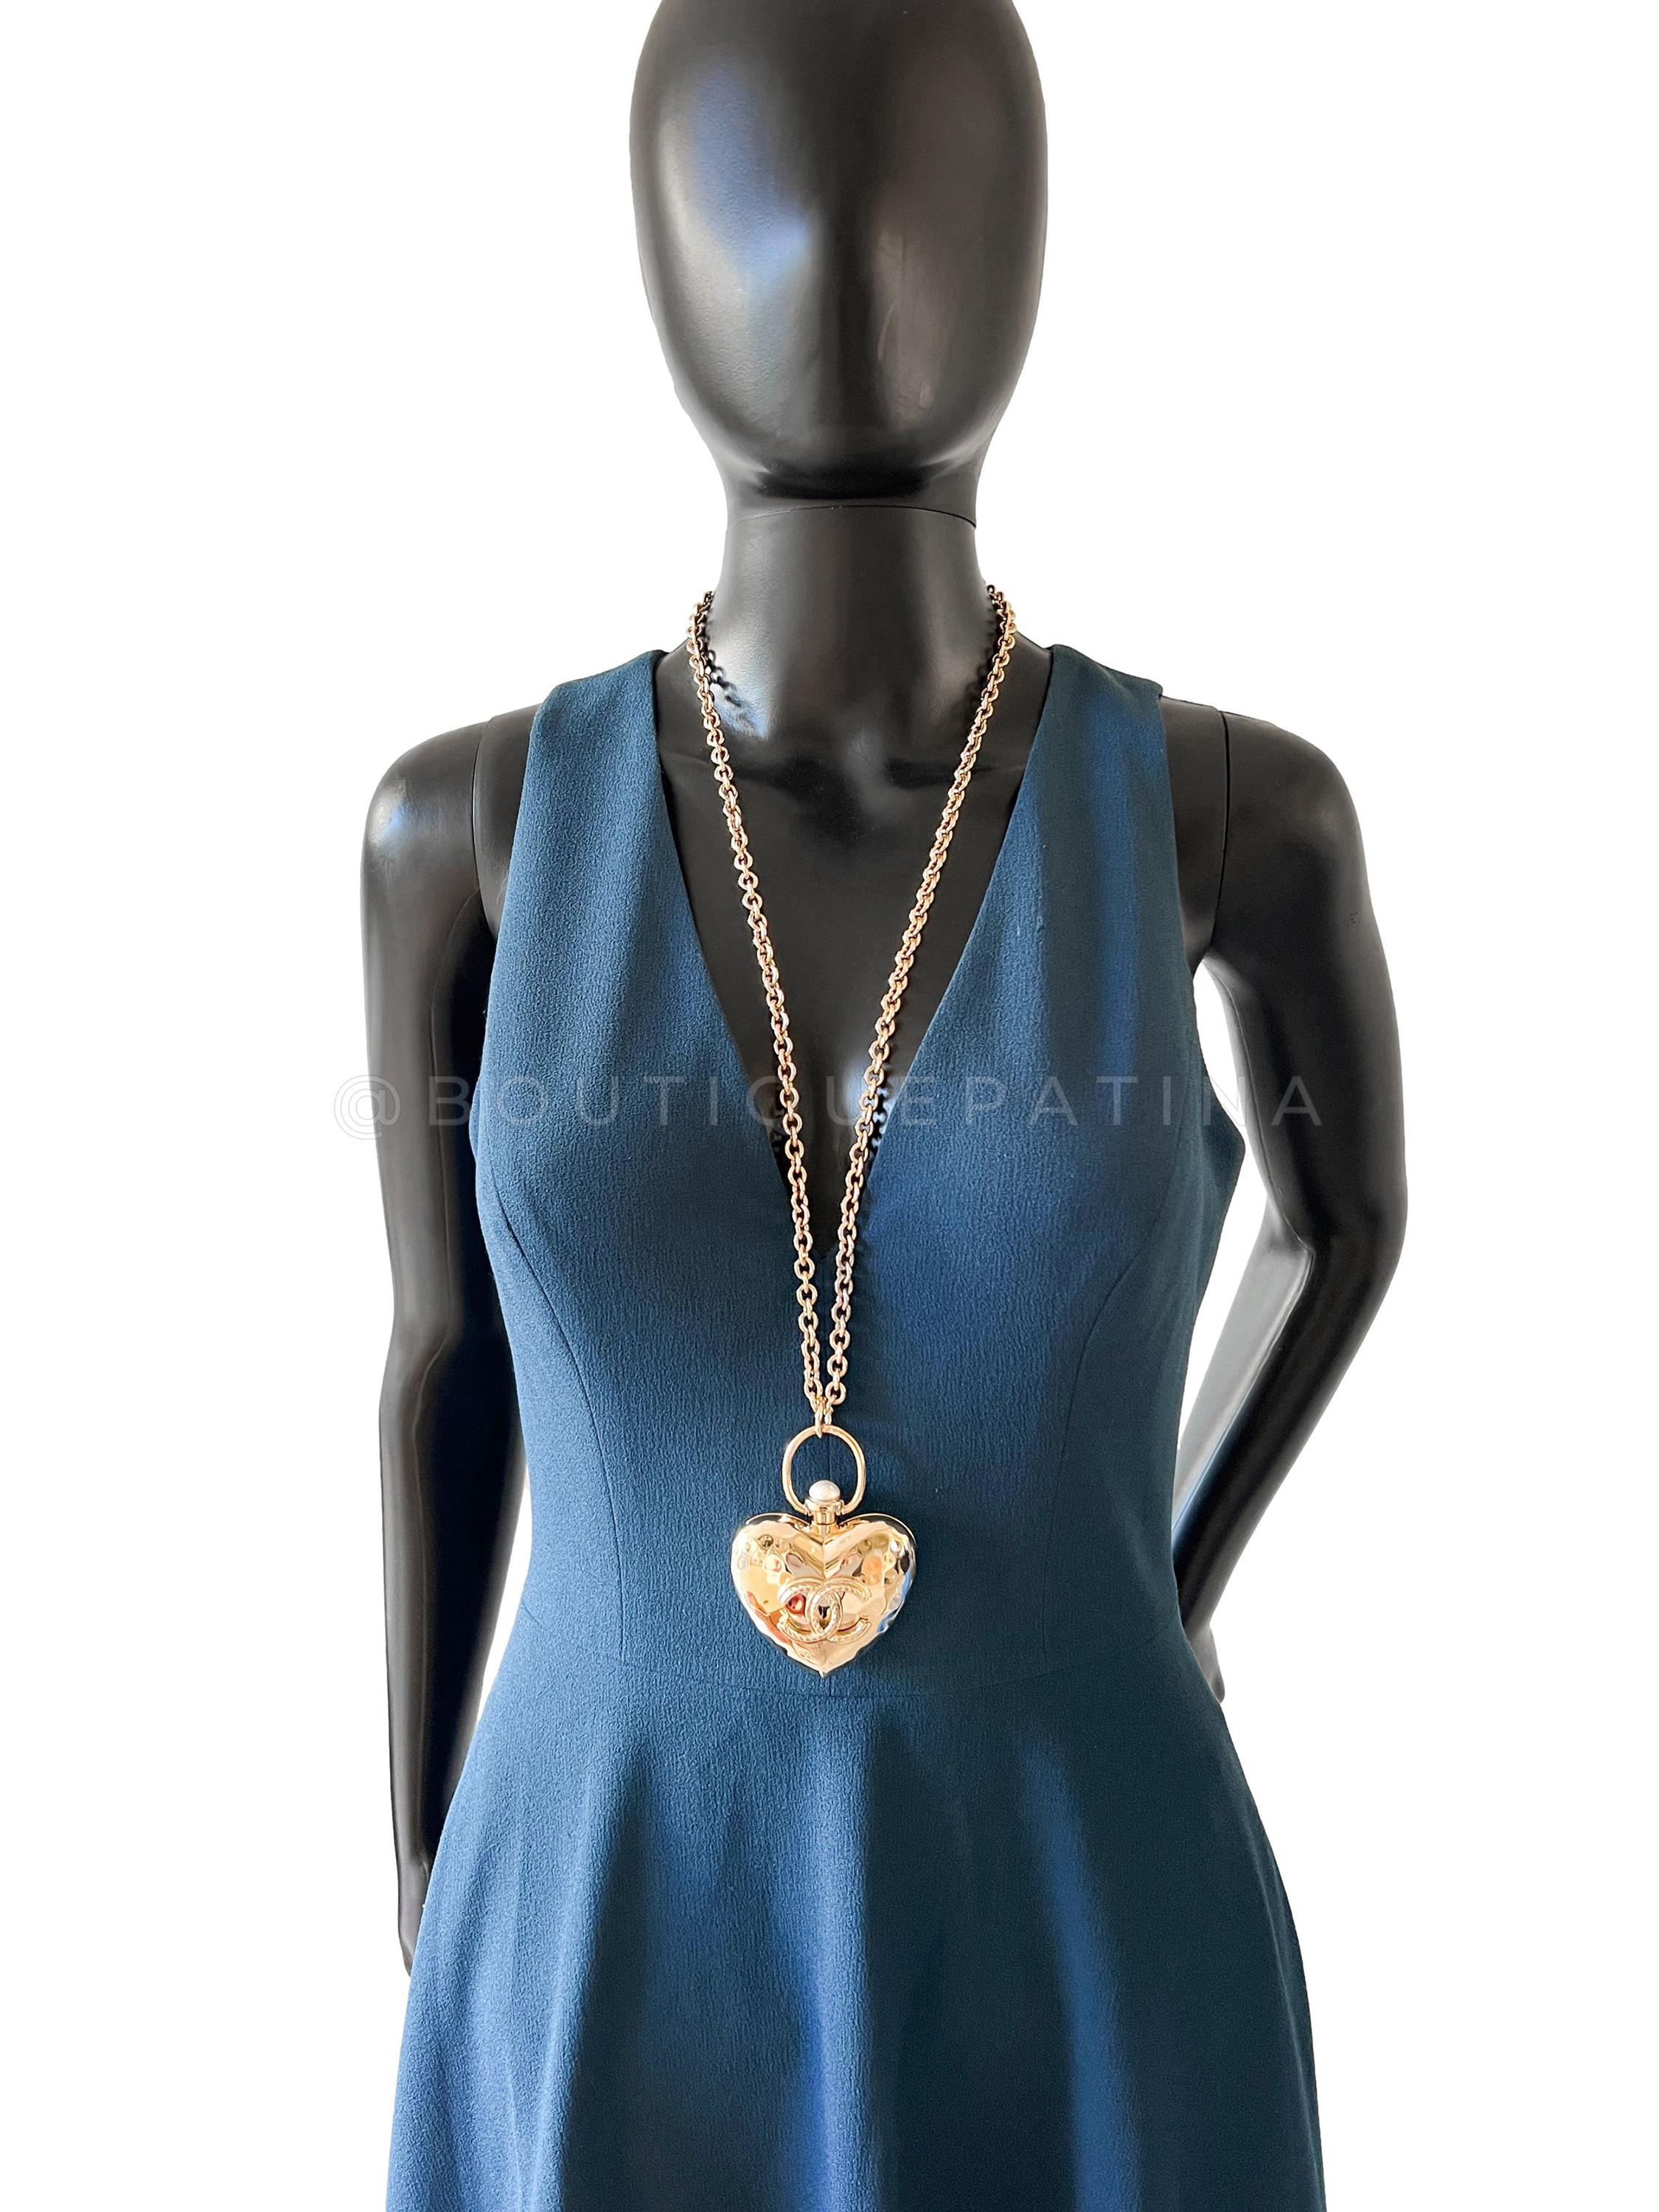 Chanel 22C Giant Heart Locket Pendant Necklace 66949 For Sale 1